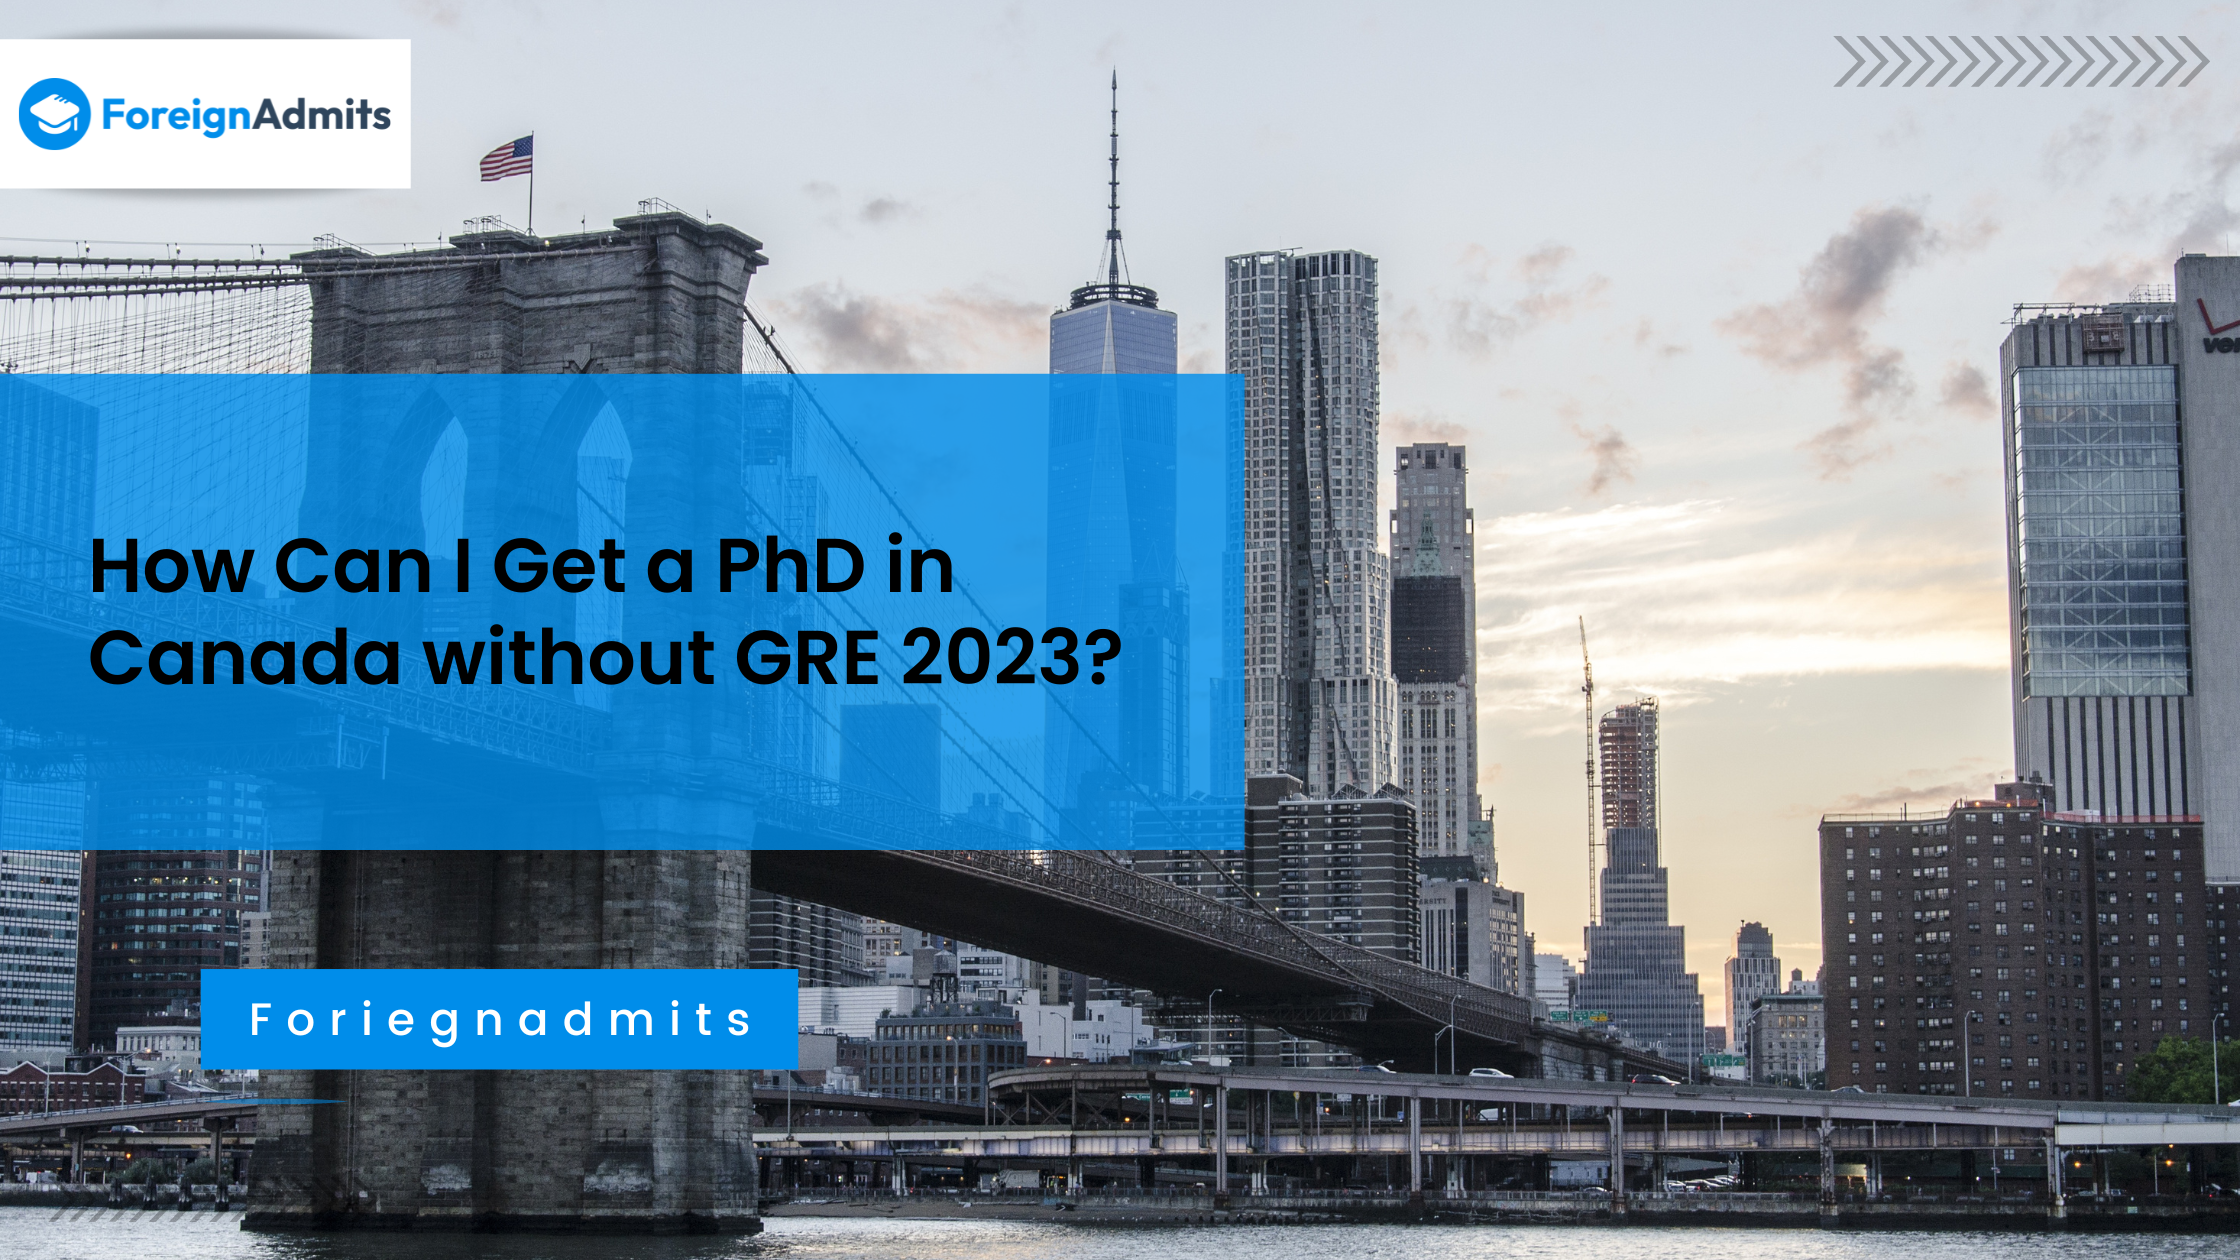 How Can I Get a PhD in Canada without GRE 2023?